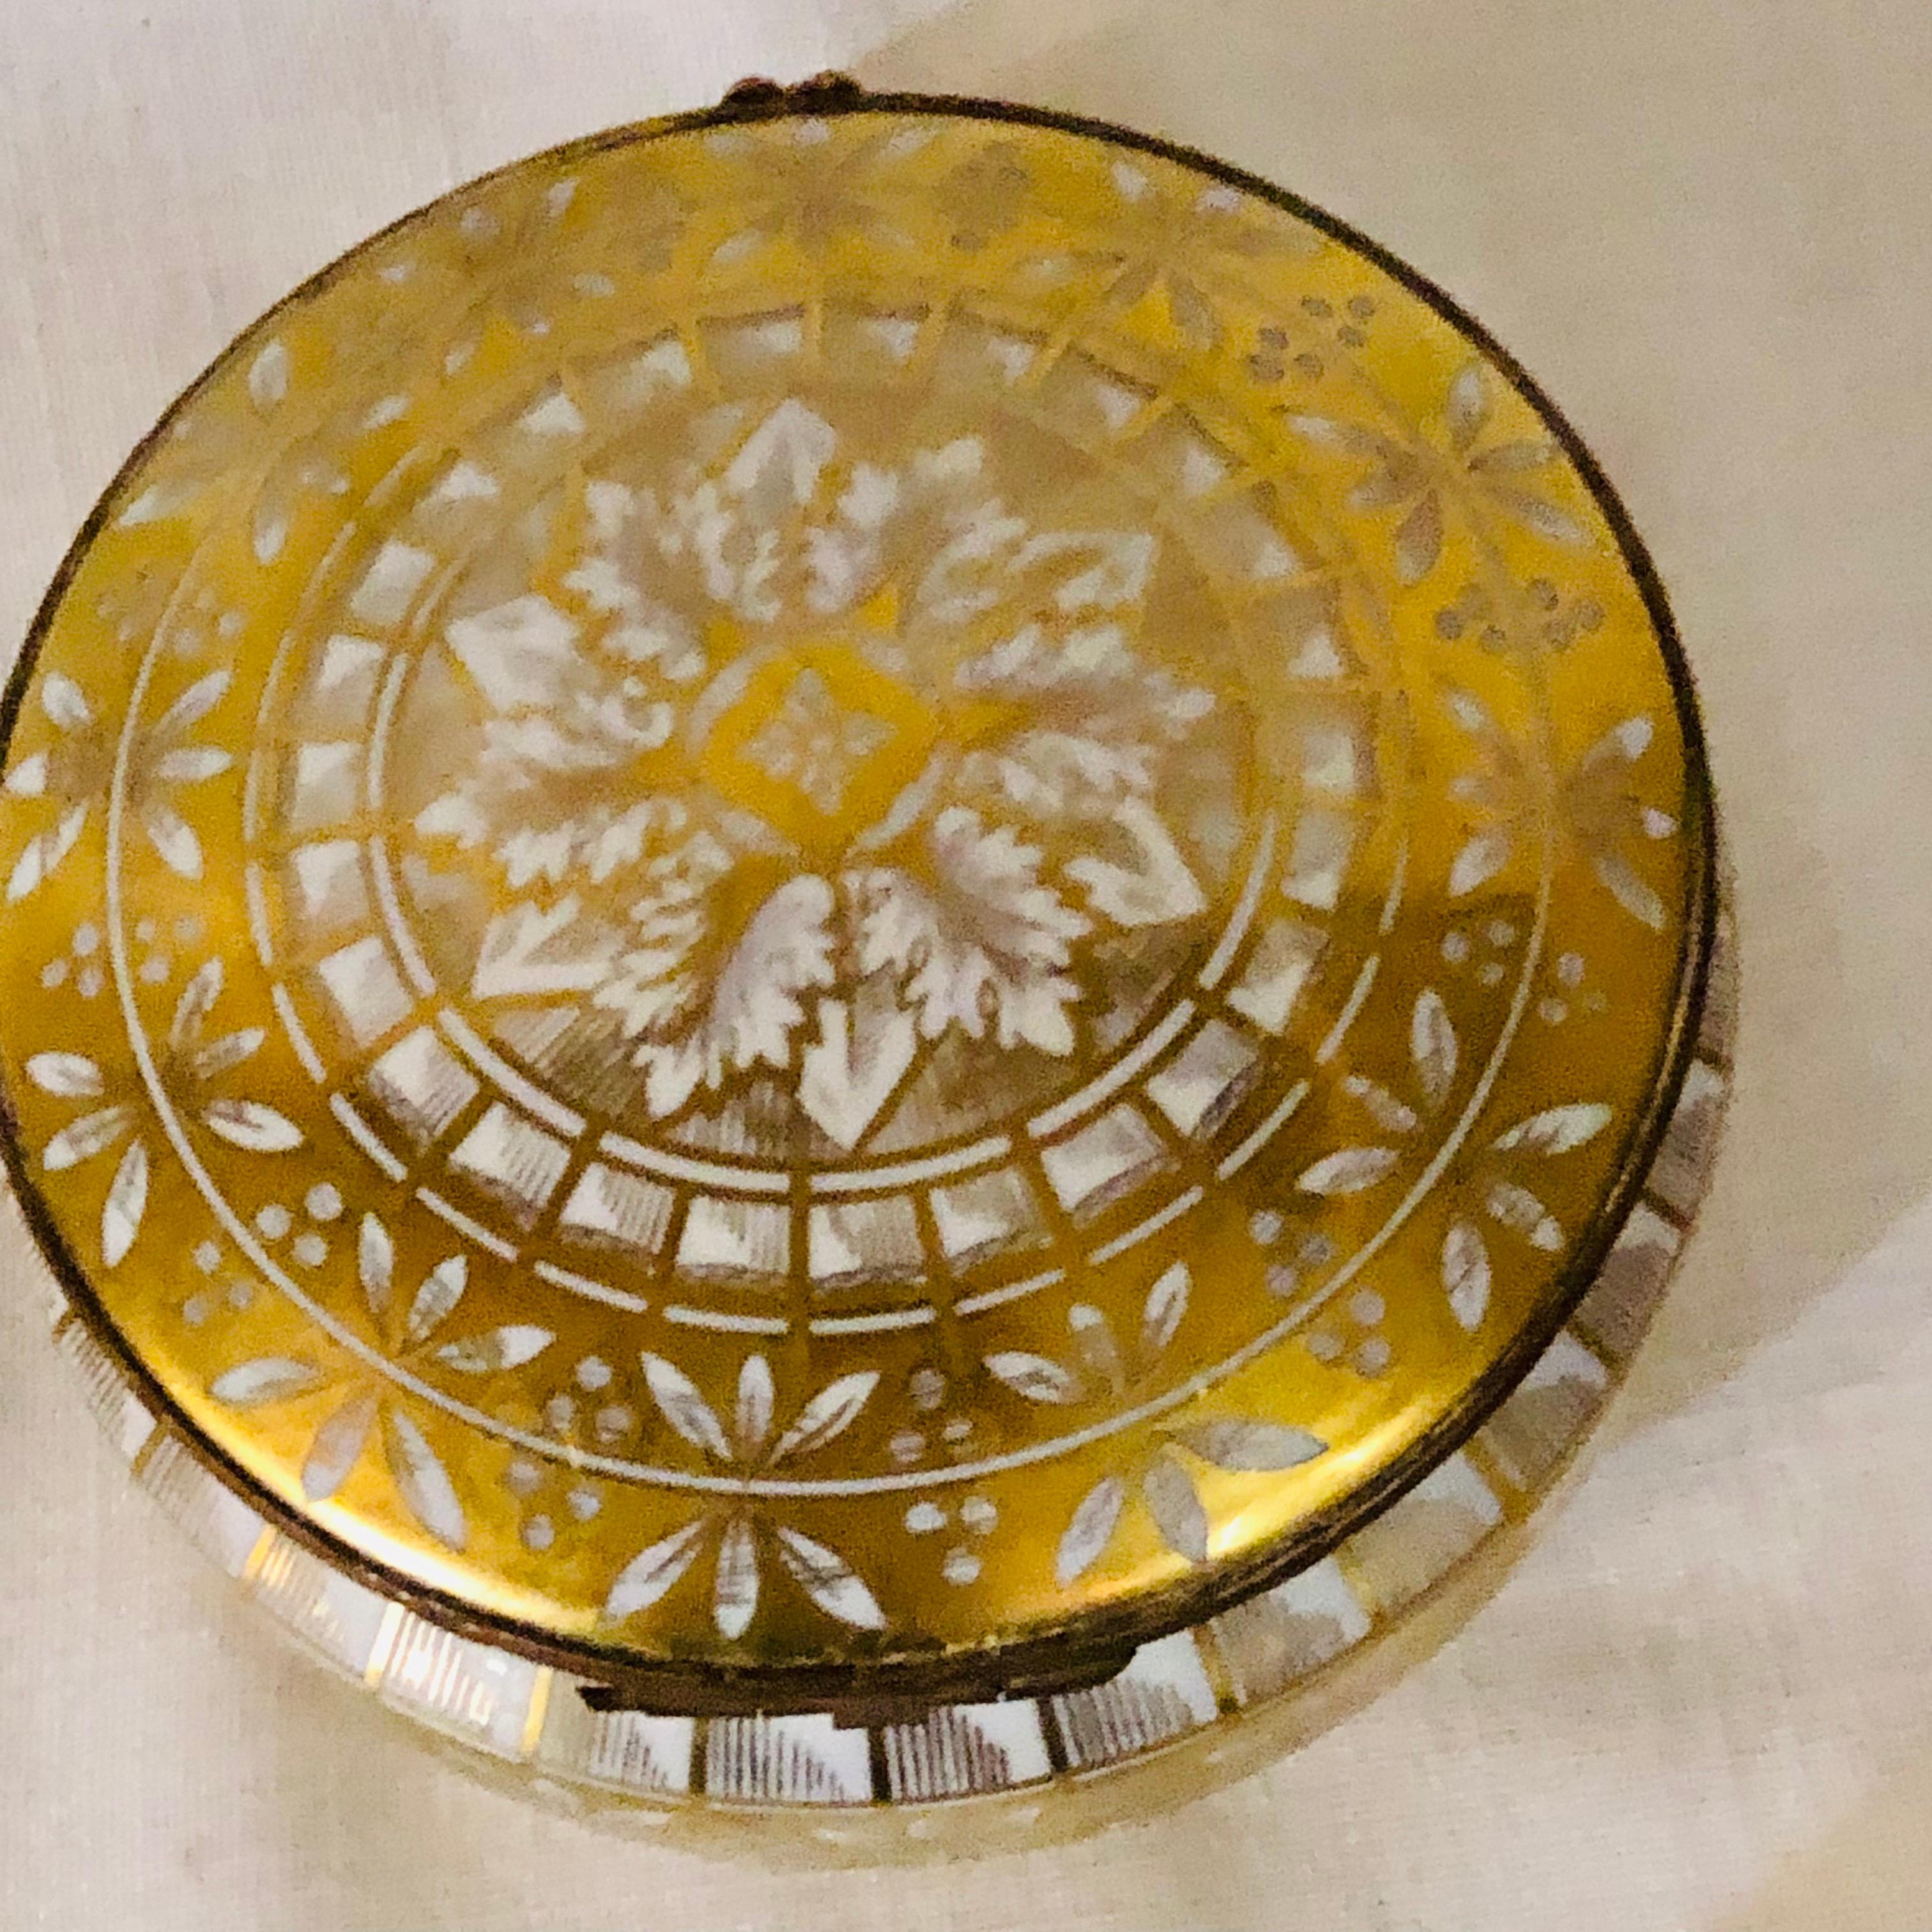 Le Tallec Porcelain Box with Gold Painted Decoration on a White Porcelain Ground 7